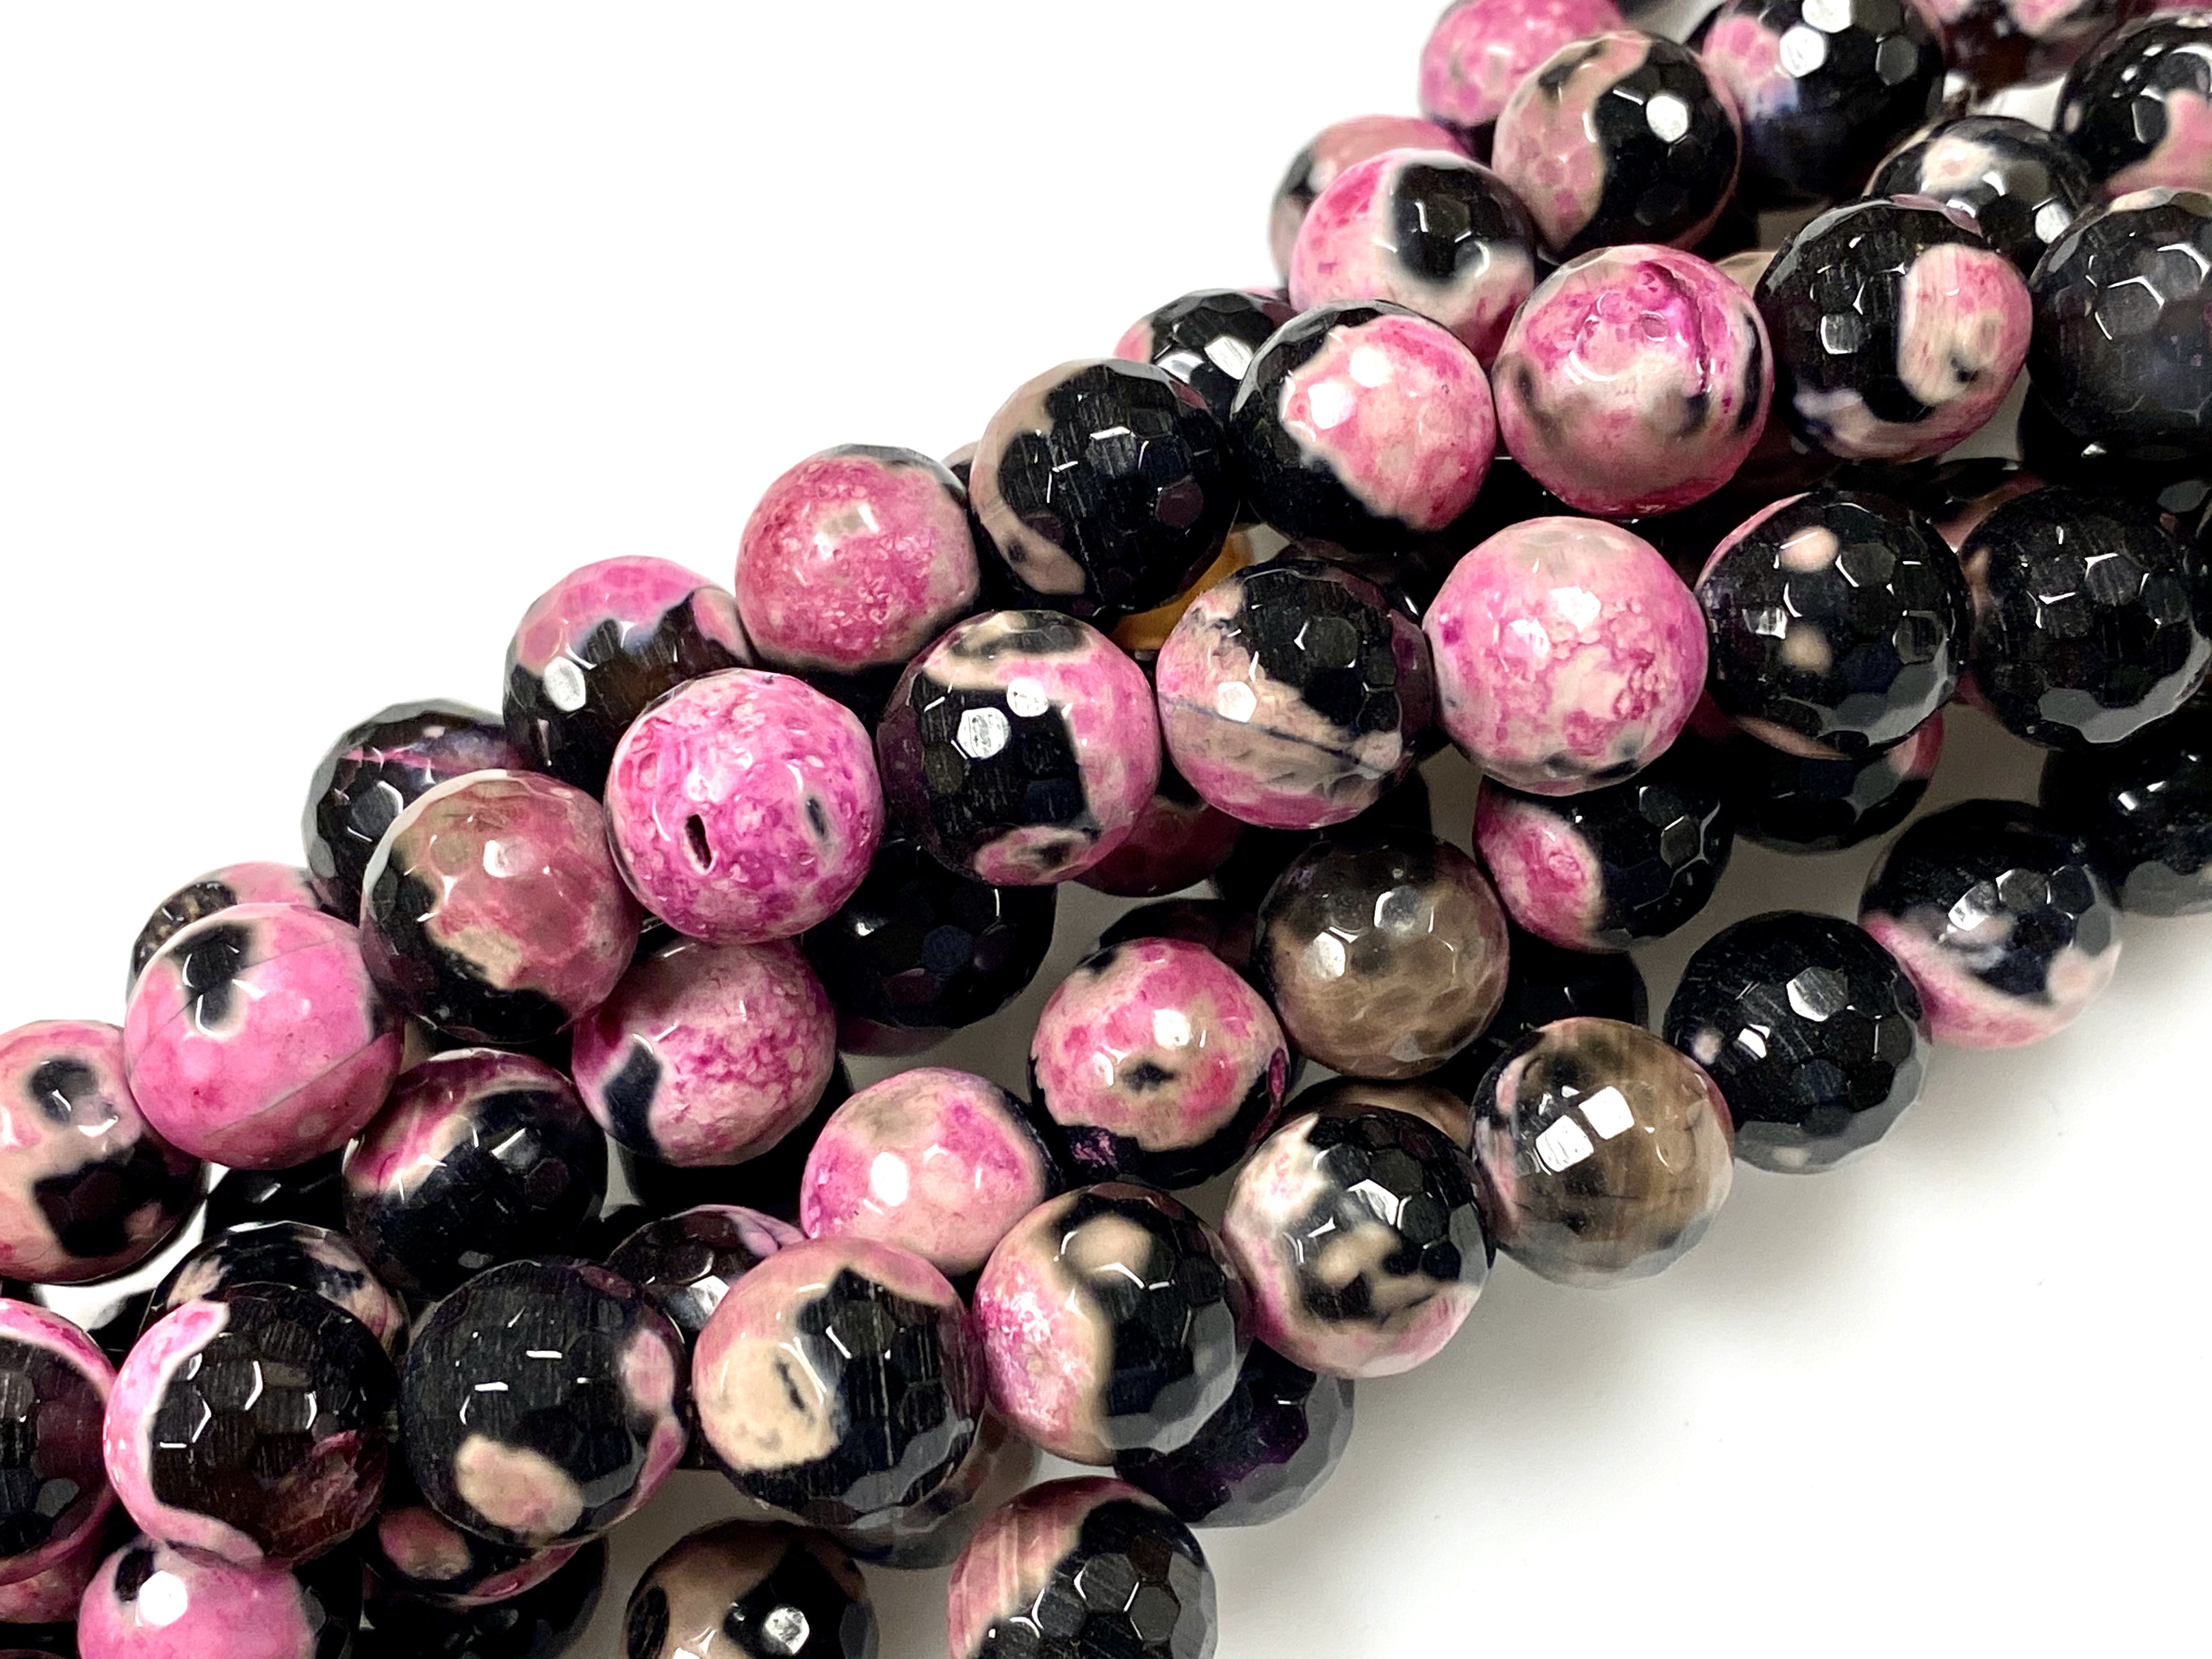 Black and White Fire Agate Gemstone Round Shape Faceted Beads Strand Beads Size 6mm 8mm Healing Gemstone Beads for DIY Jewelry Making